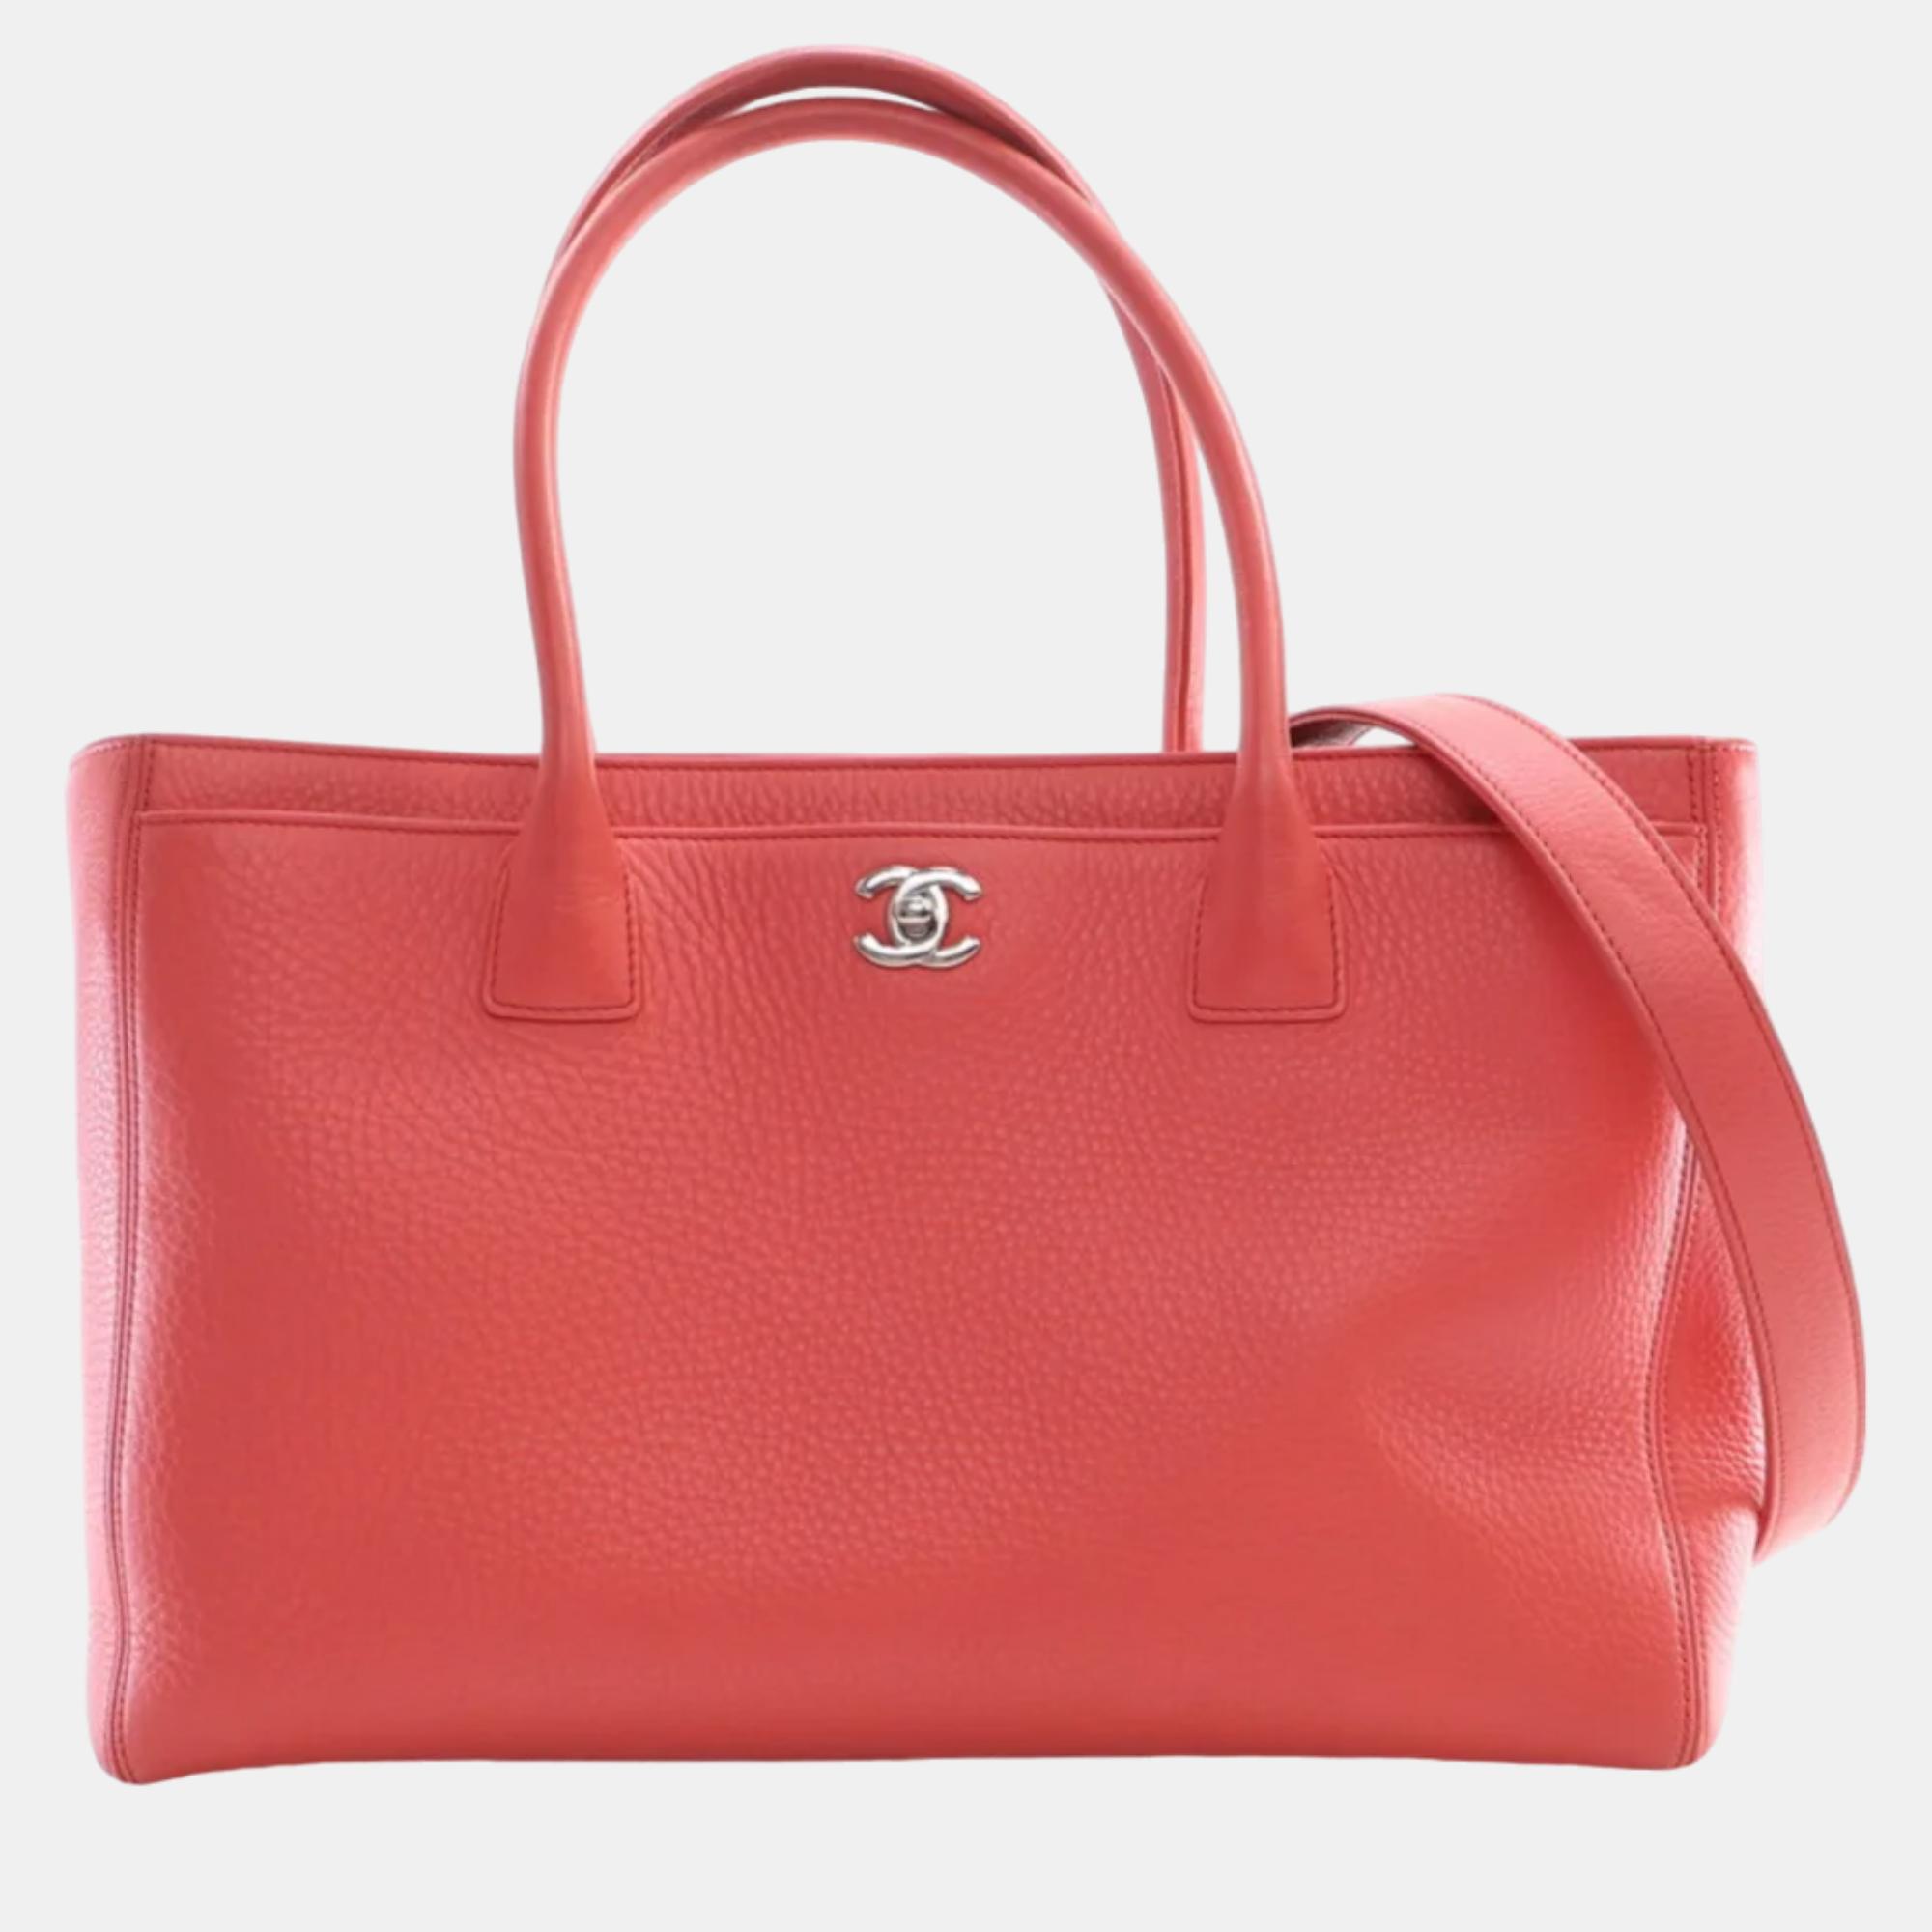 Chanel pink leather cerf shopping tote bag